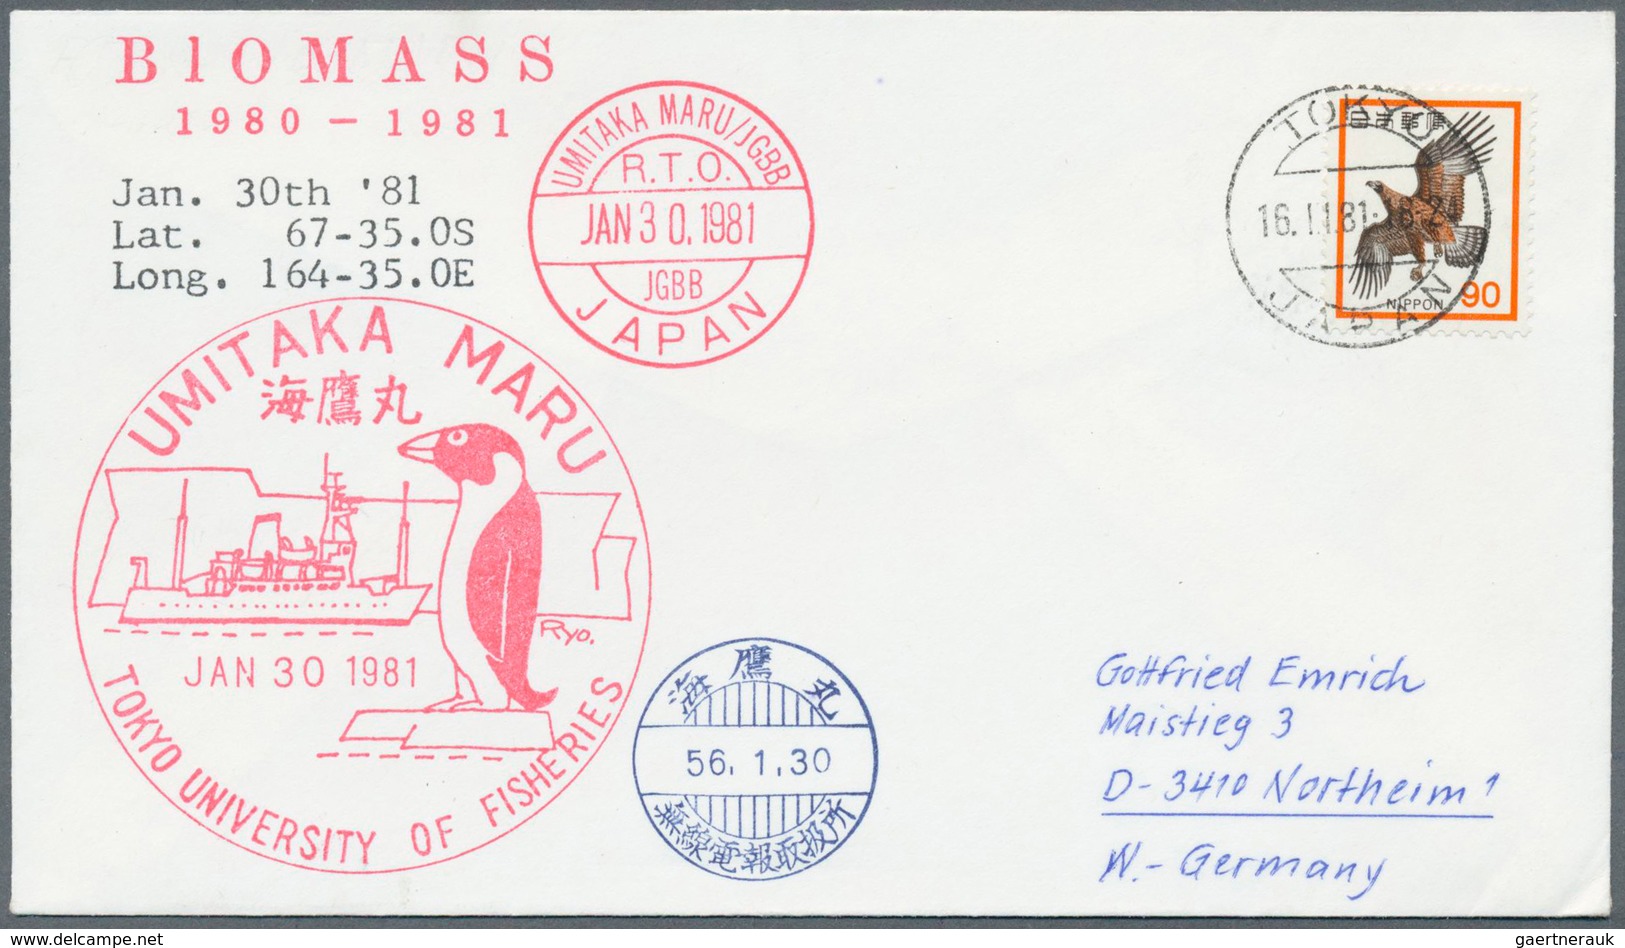 24952 Thematik: Antarktis / antarctic: 1970/2010 (ca.), most sophisticated balance of apprx. 1500+ (fairly